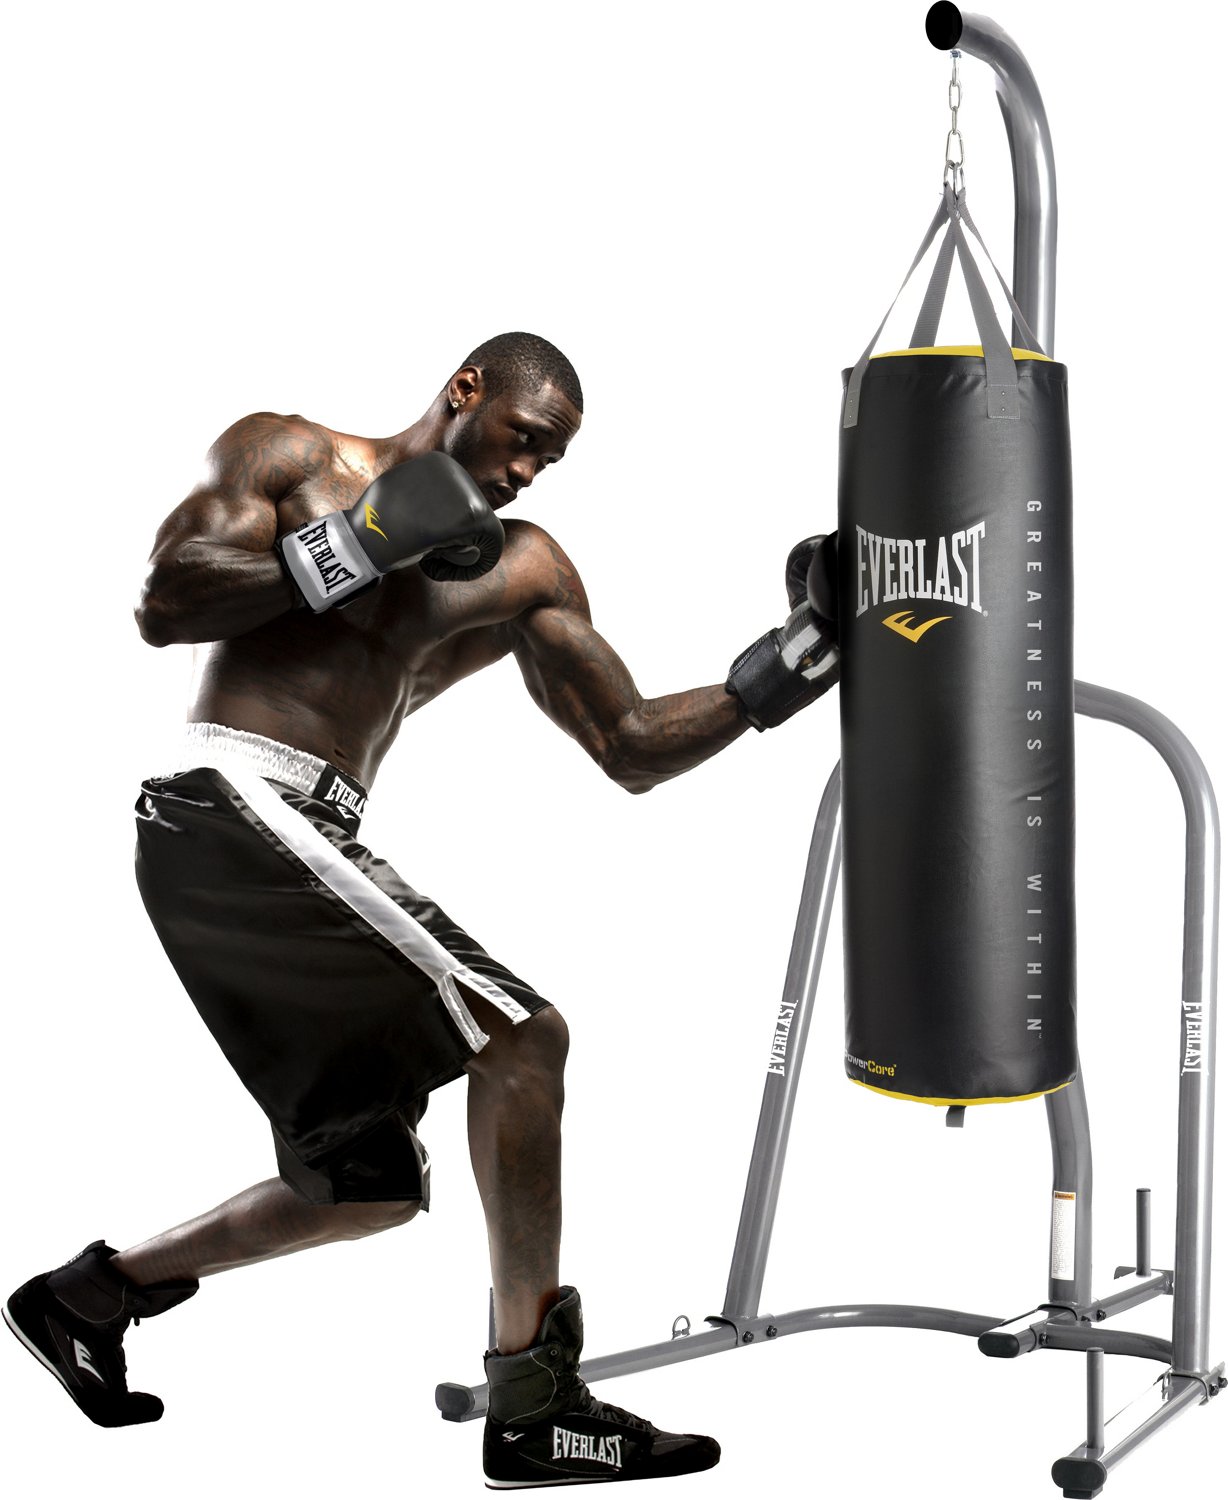 Academy sports punching bag